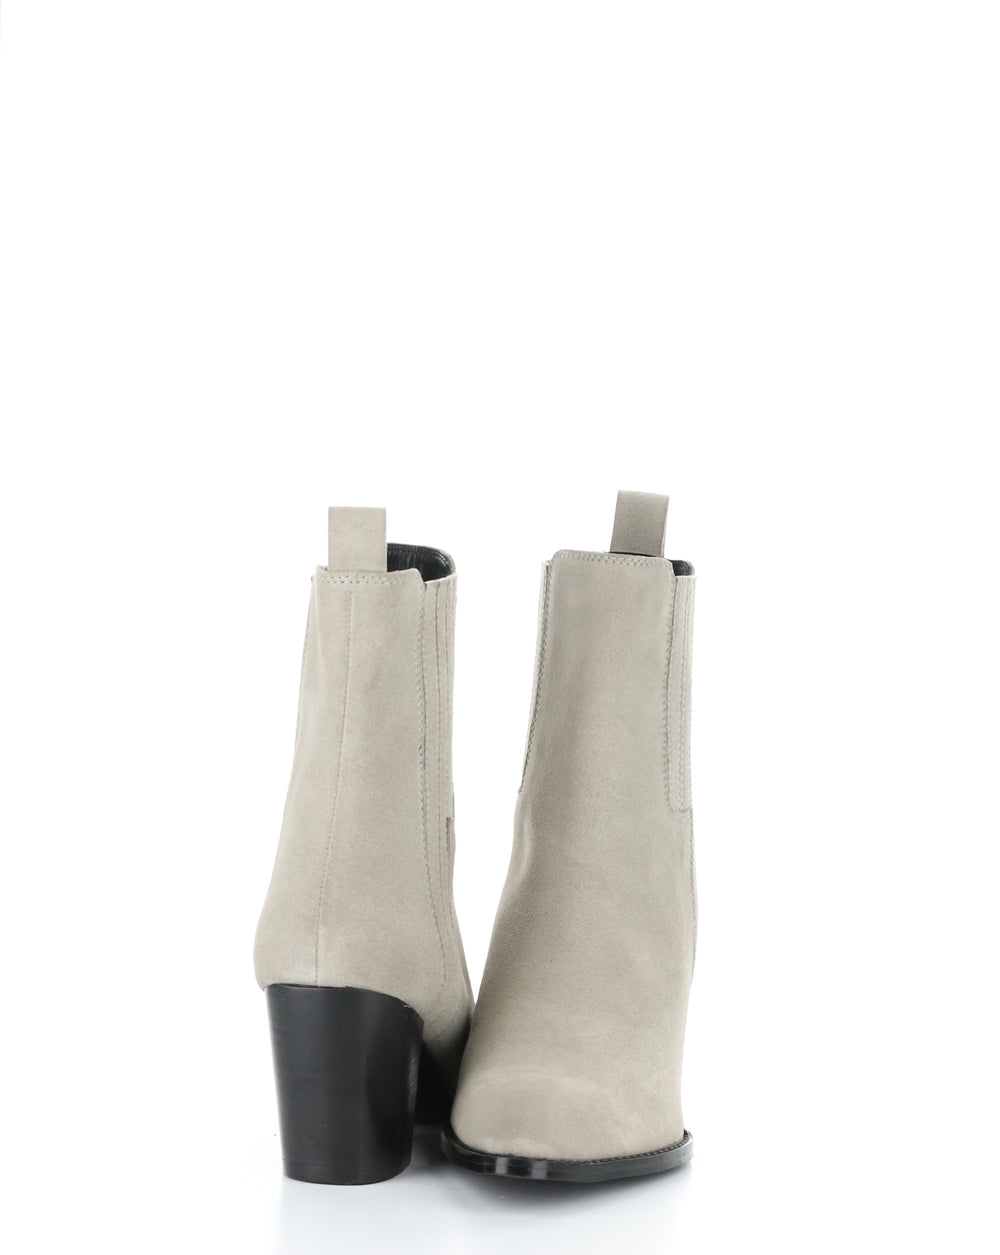 TRULY DK GREY Pointed Toe Boots